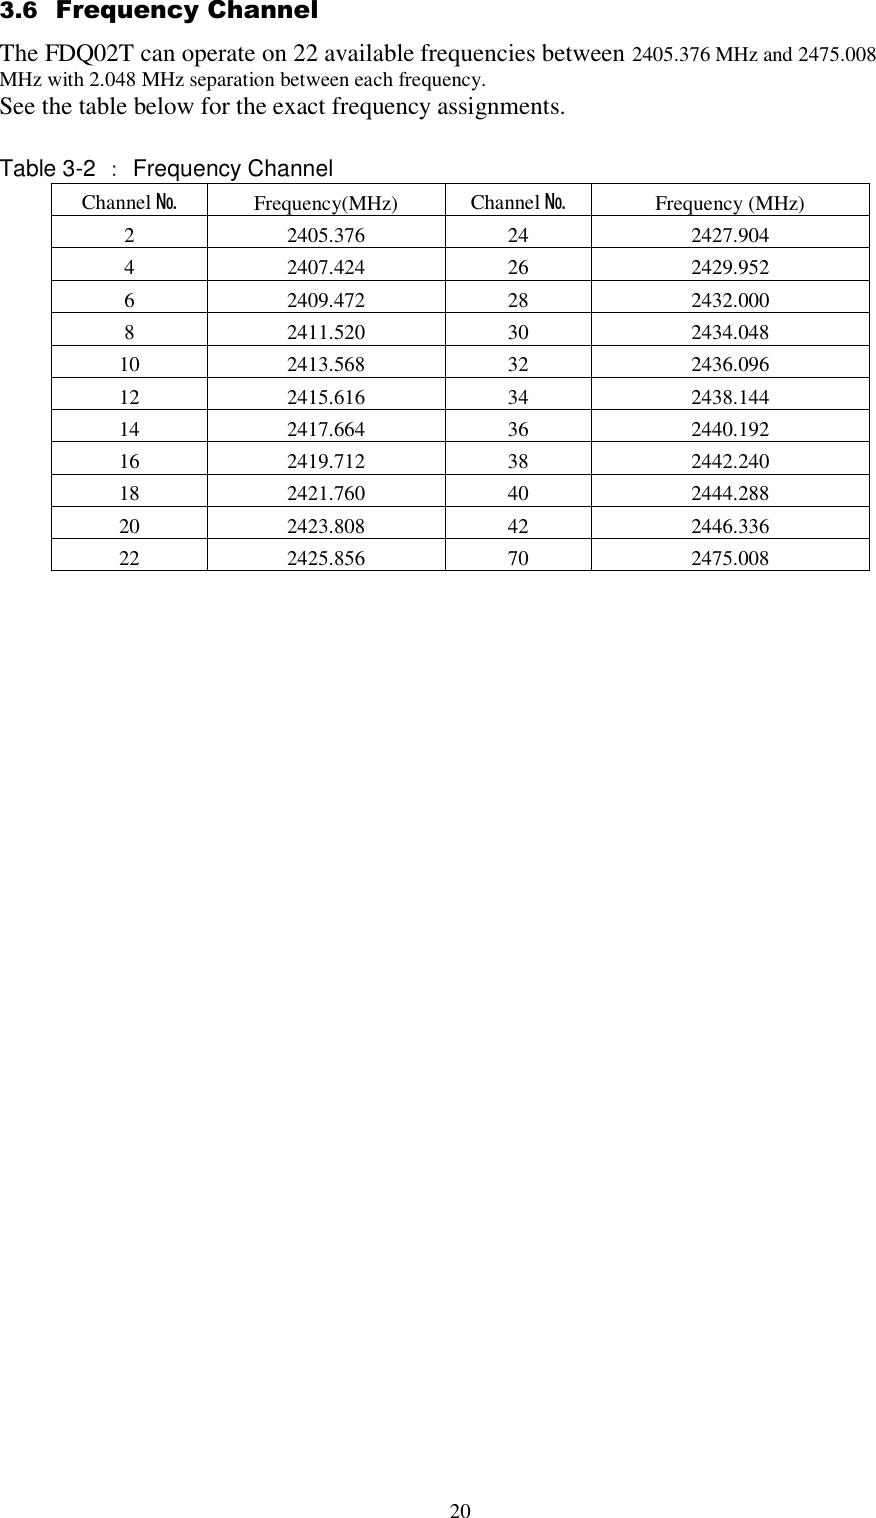  20 3.6  Frequency Channel The FDQ02T can operate on 22 available frequencies between 2405.376 MHz and 2475.008 MHz with 2.048 MHz separation between each frequency. See the table below for the exact frequency assignments.  Table 3-2  ：  Frequency Channel Channel № Frequency(MHz) Channel № Frequency (MHz) 2 2405.376 24 2427.904 4 2407.424 26 2429.952 6 2409.472 28 2432.000 8 2411.520 30 2434.048 10 2413.568 32 2436.096 12 2415.616 34 2438.144 14 2417.664 36 2440.192 16 2419.712 38 2442.240 18 2421.760 40 2444.288 20 2423.808 42 2446.336 22 2425.856 70 2475.008     